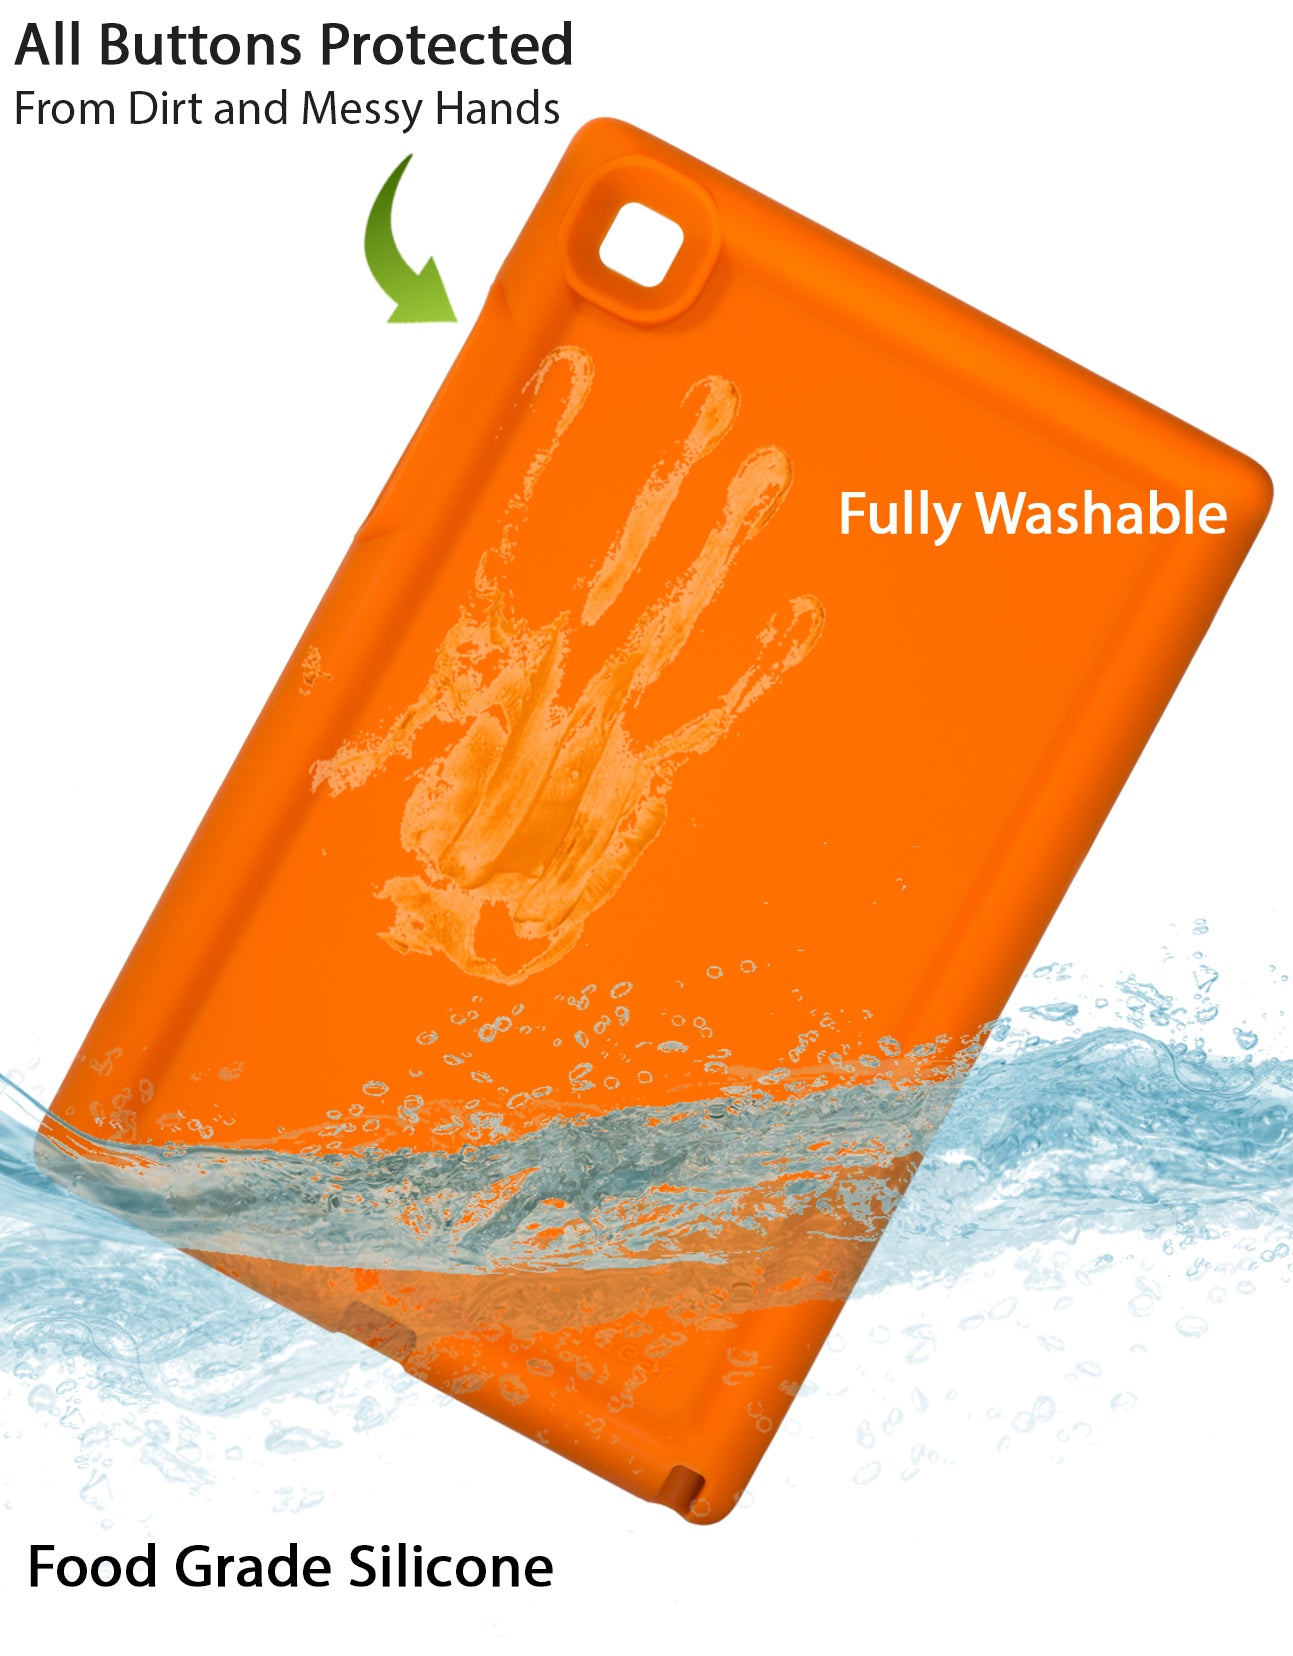 Bobj Rugged Tablet Case for Samsung Galaxy Tab A7 10.4 inch 2020 Models SM-T500, SM-T505, SM-T507 - Outrageous Orange